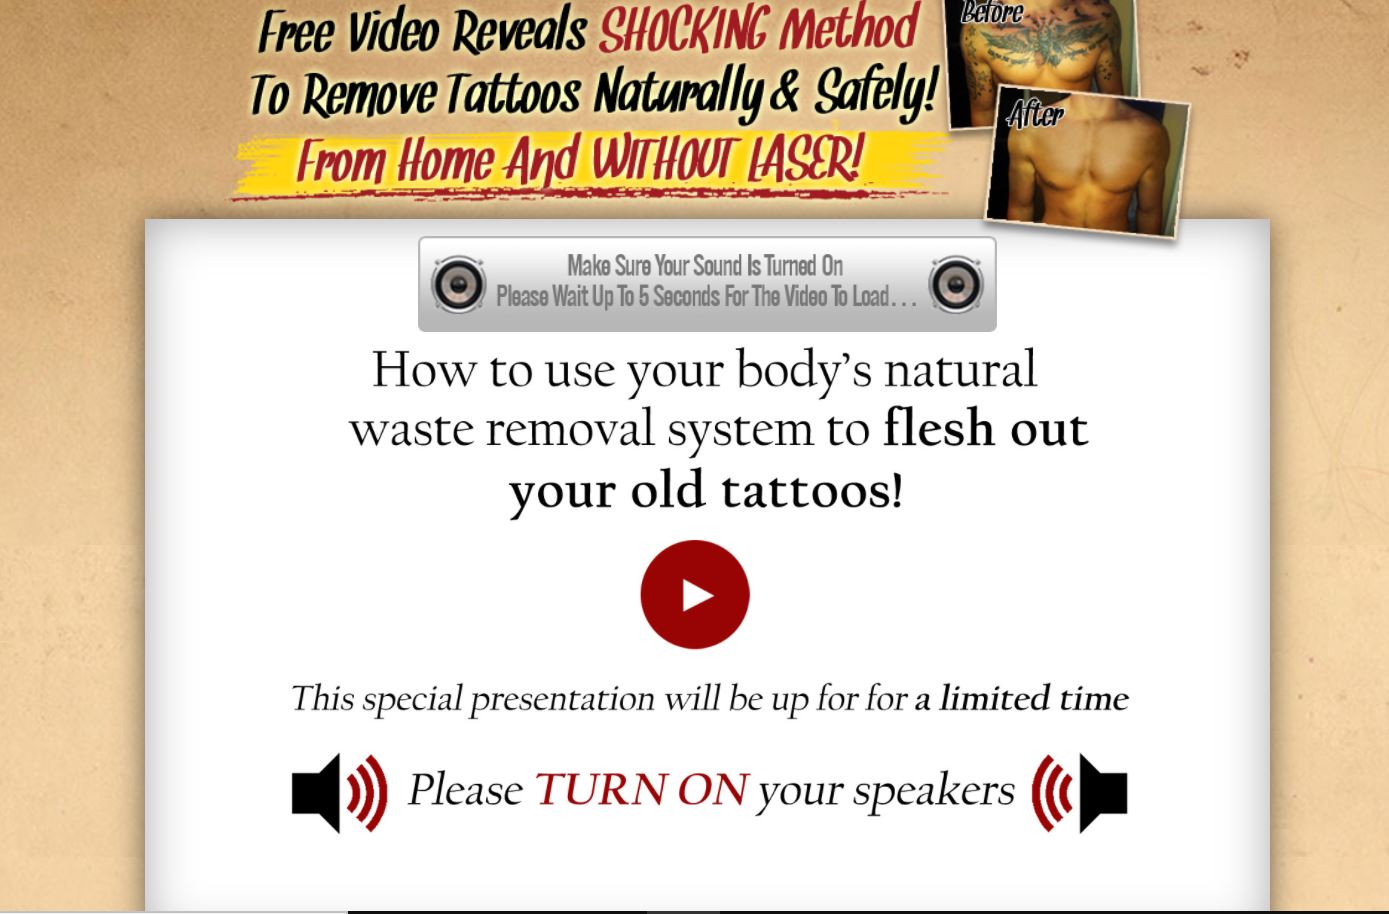 Laserless Tattoo remover video